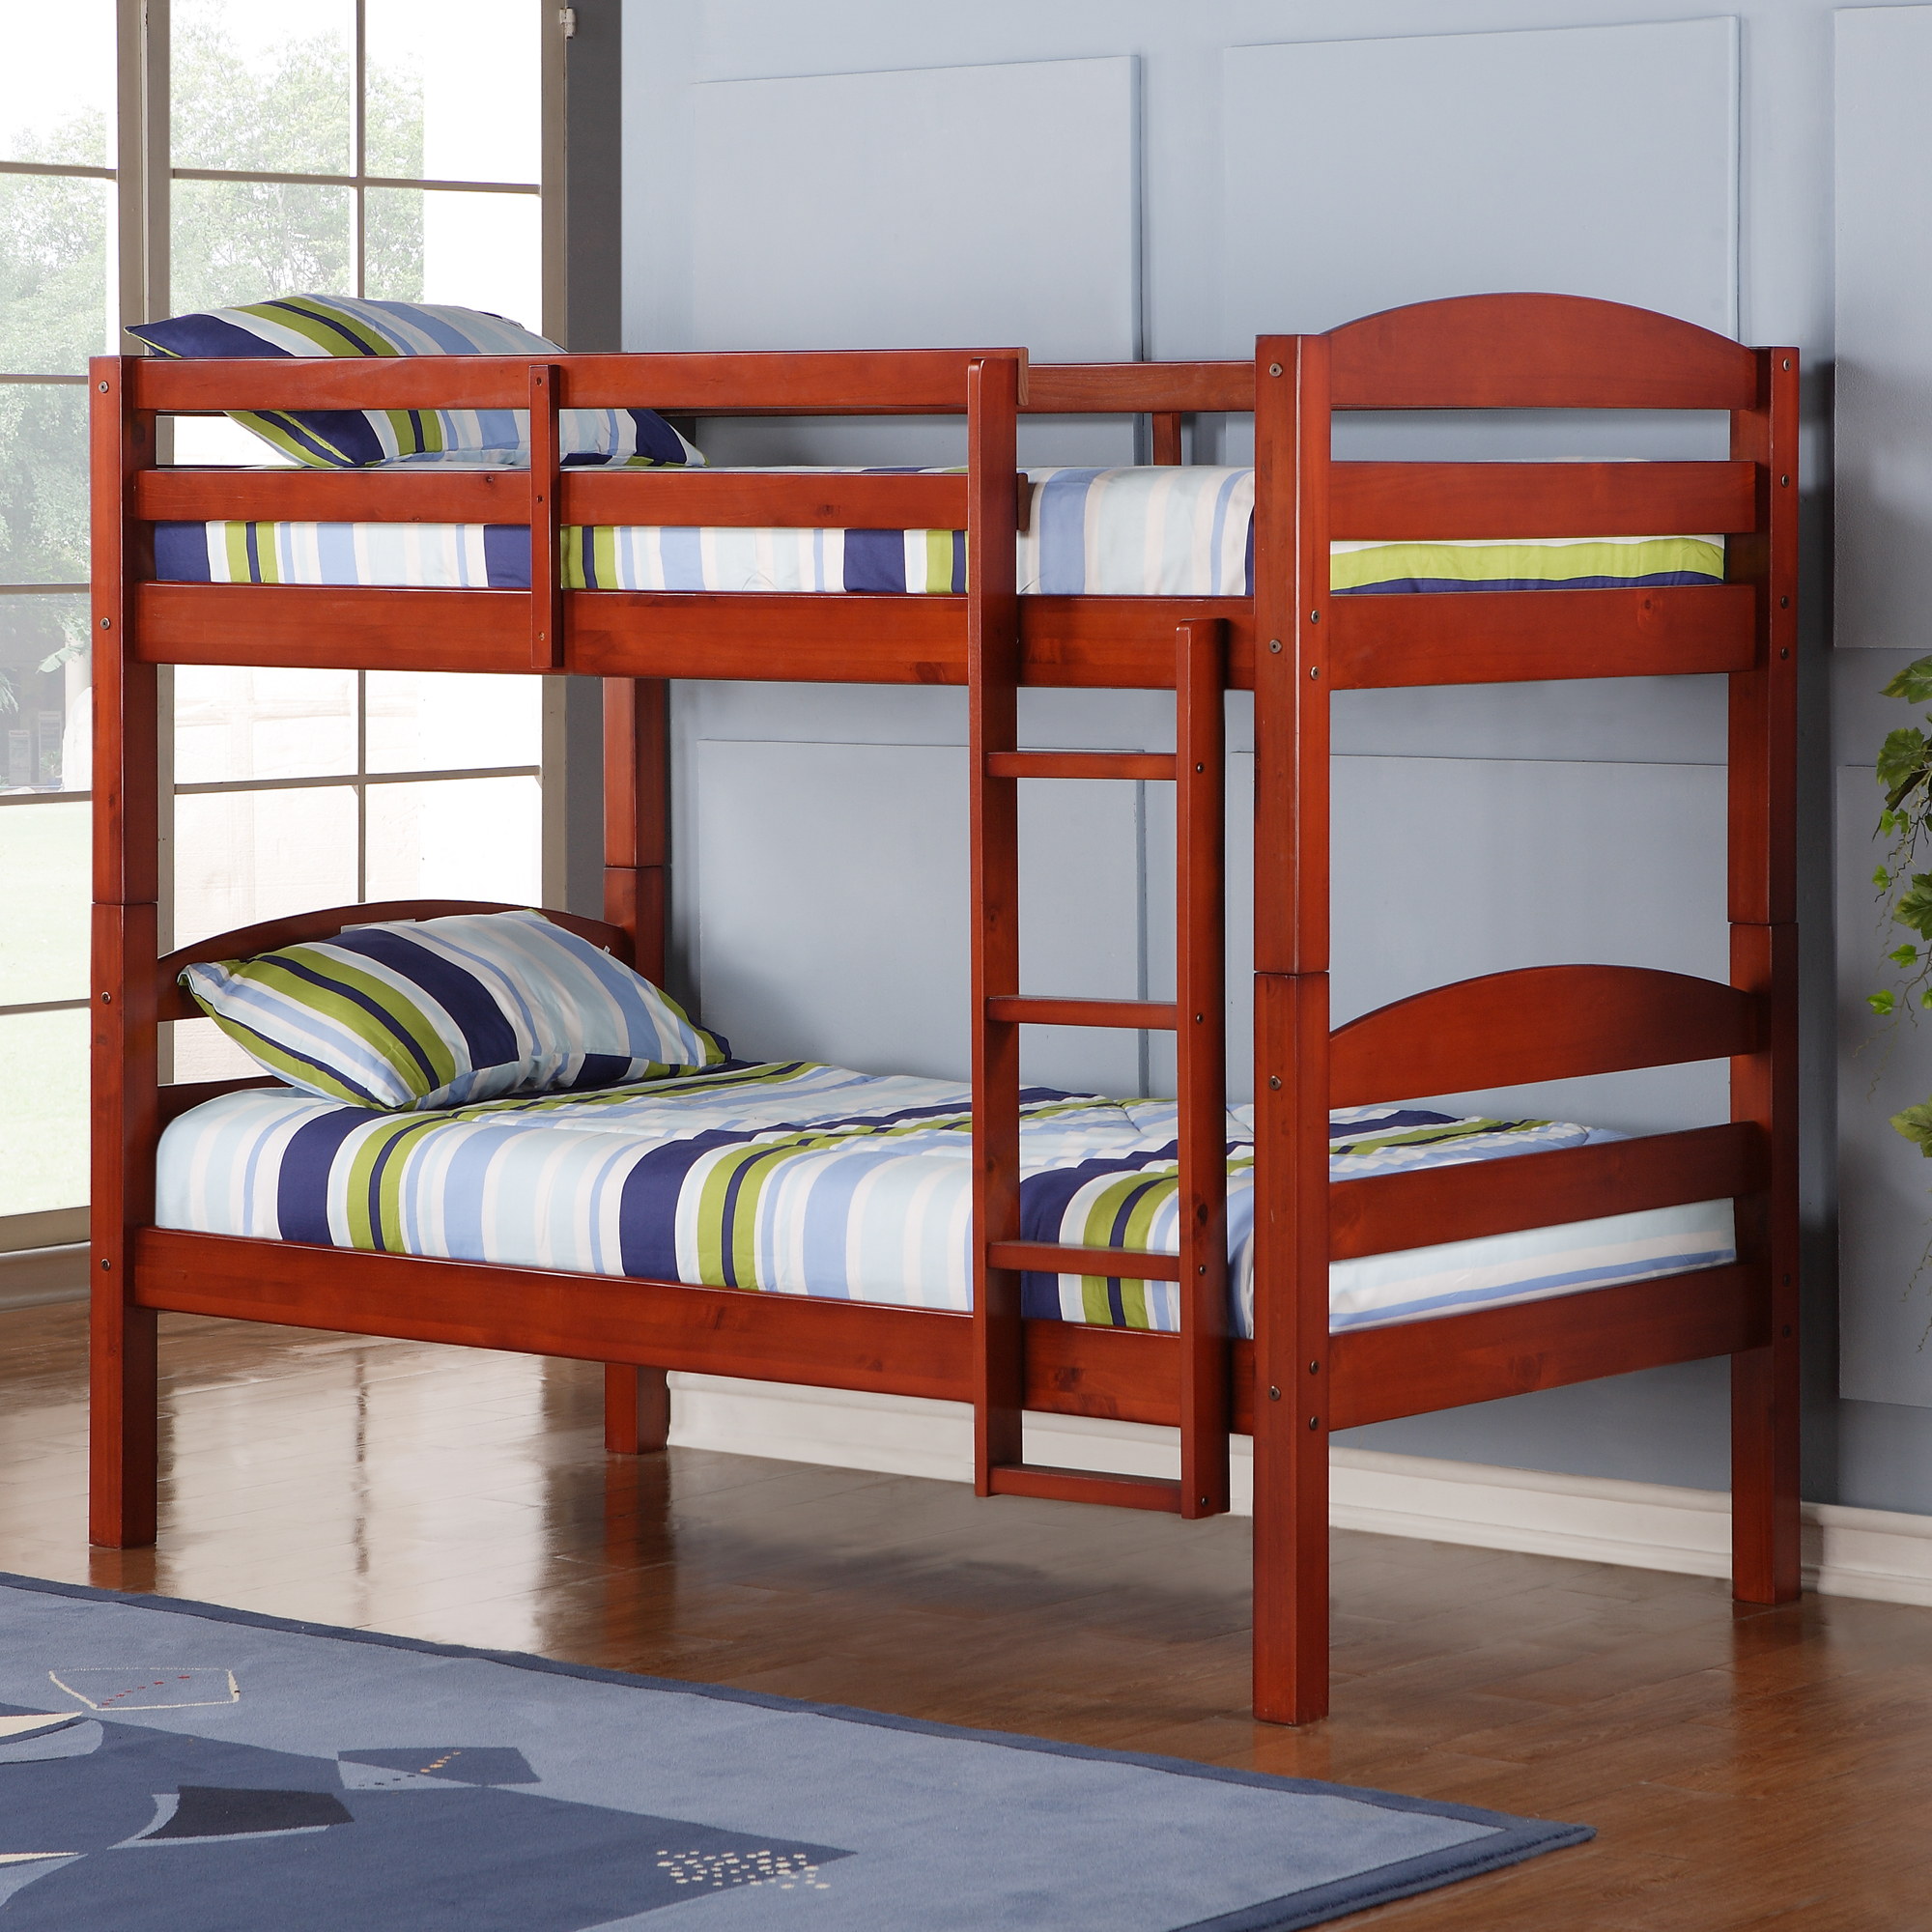 Solid Wood Bunk Beds For Kids, Sears Bunk Beds With Trundle